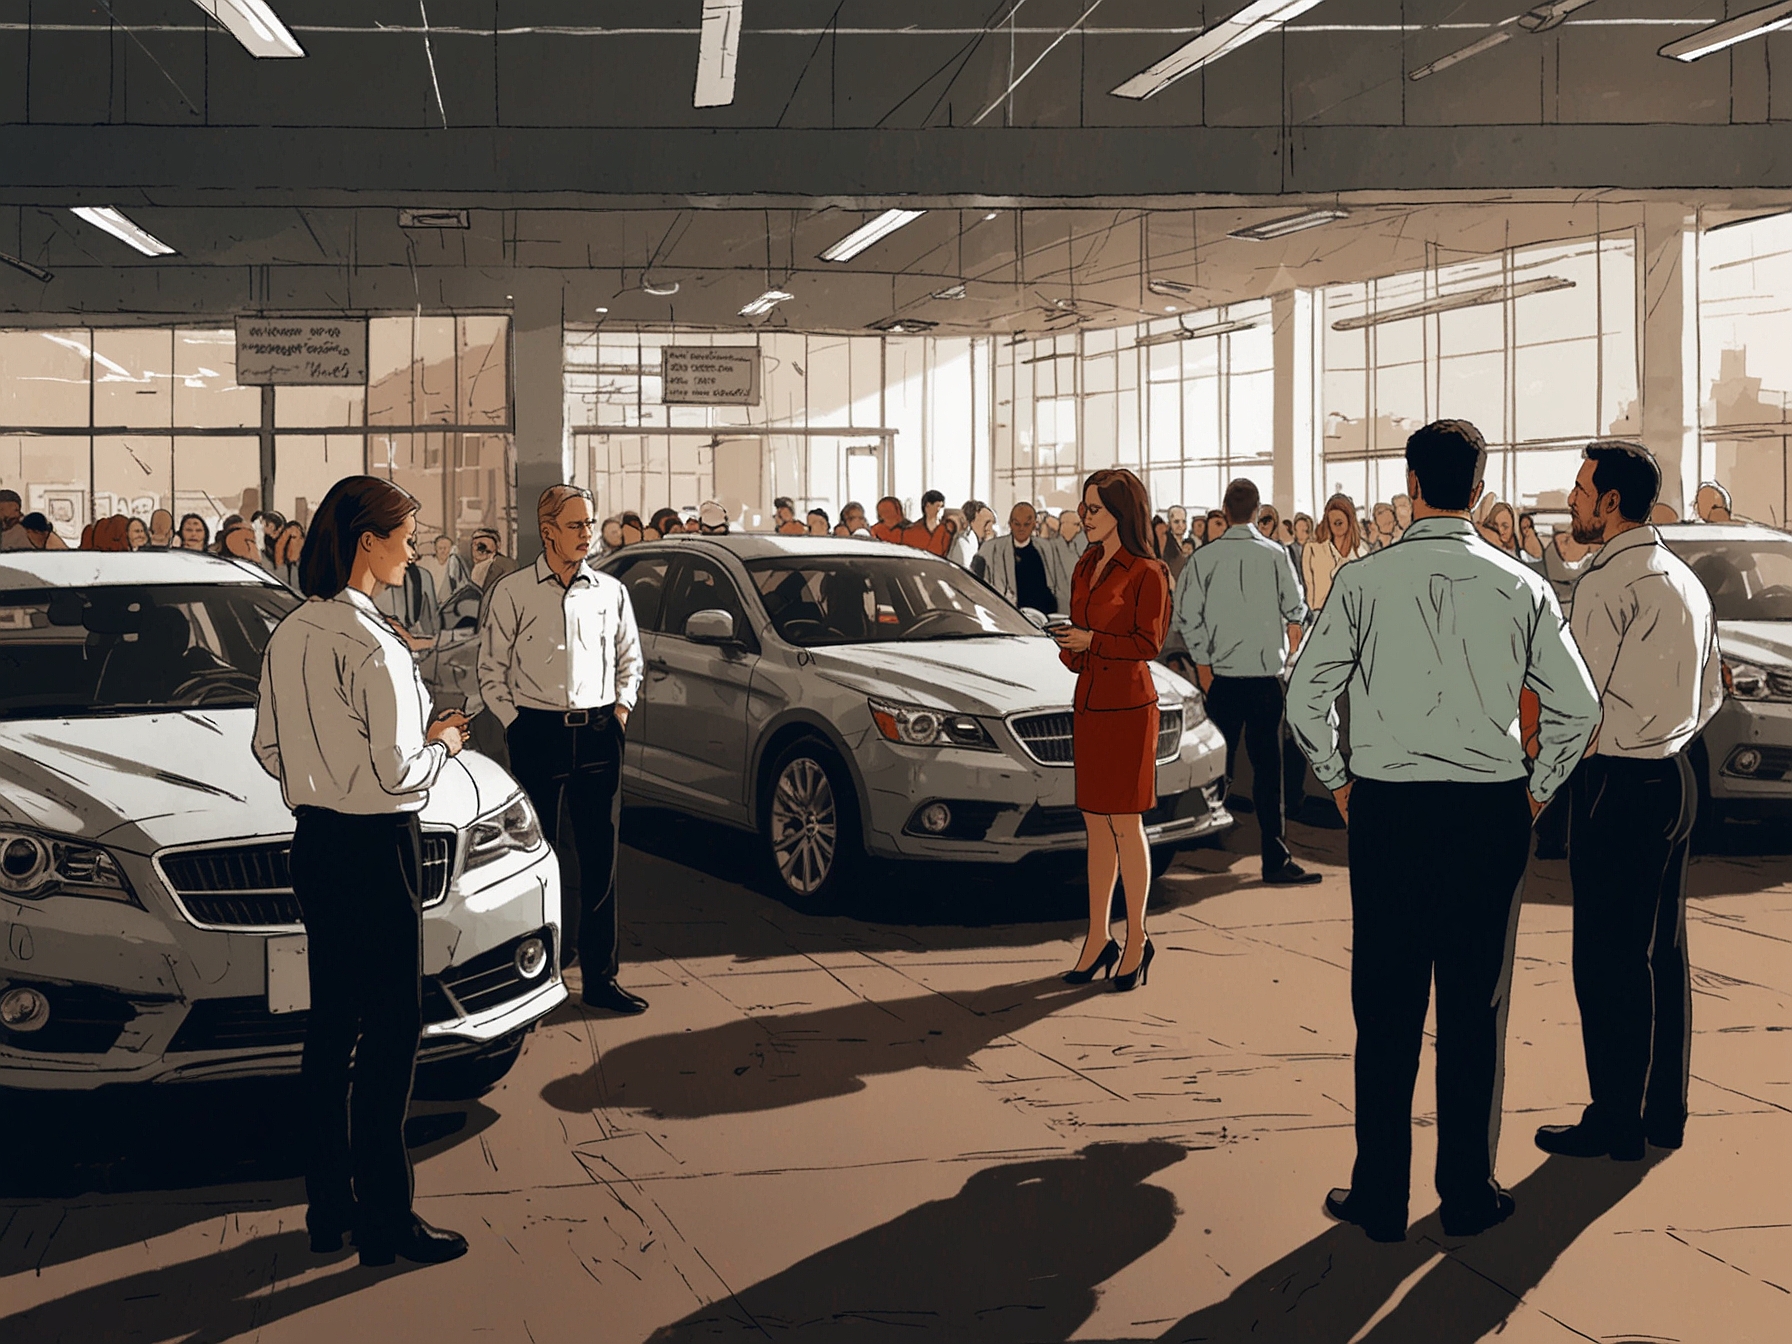 A busy auto dealership with sales staff and customers standing by, looking frustrated due to disrupted services caused by a cyber outage, highlighting operational challenges.